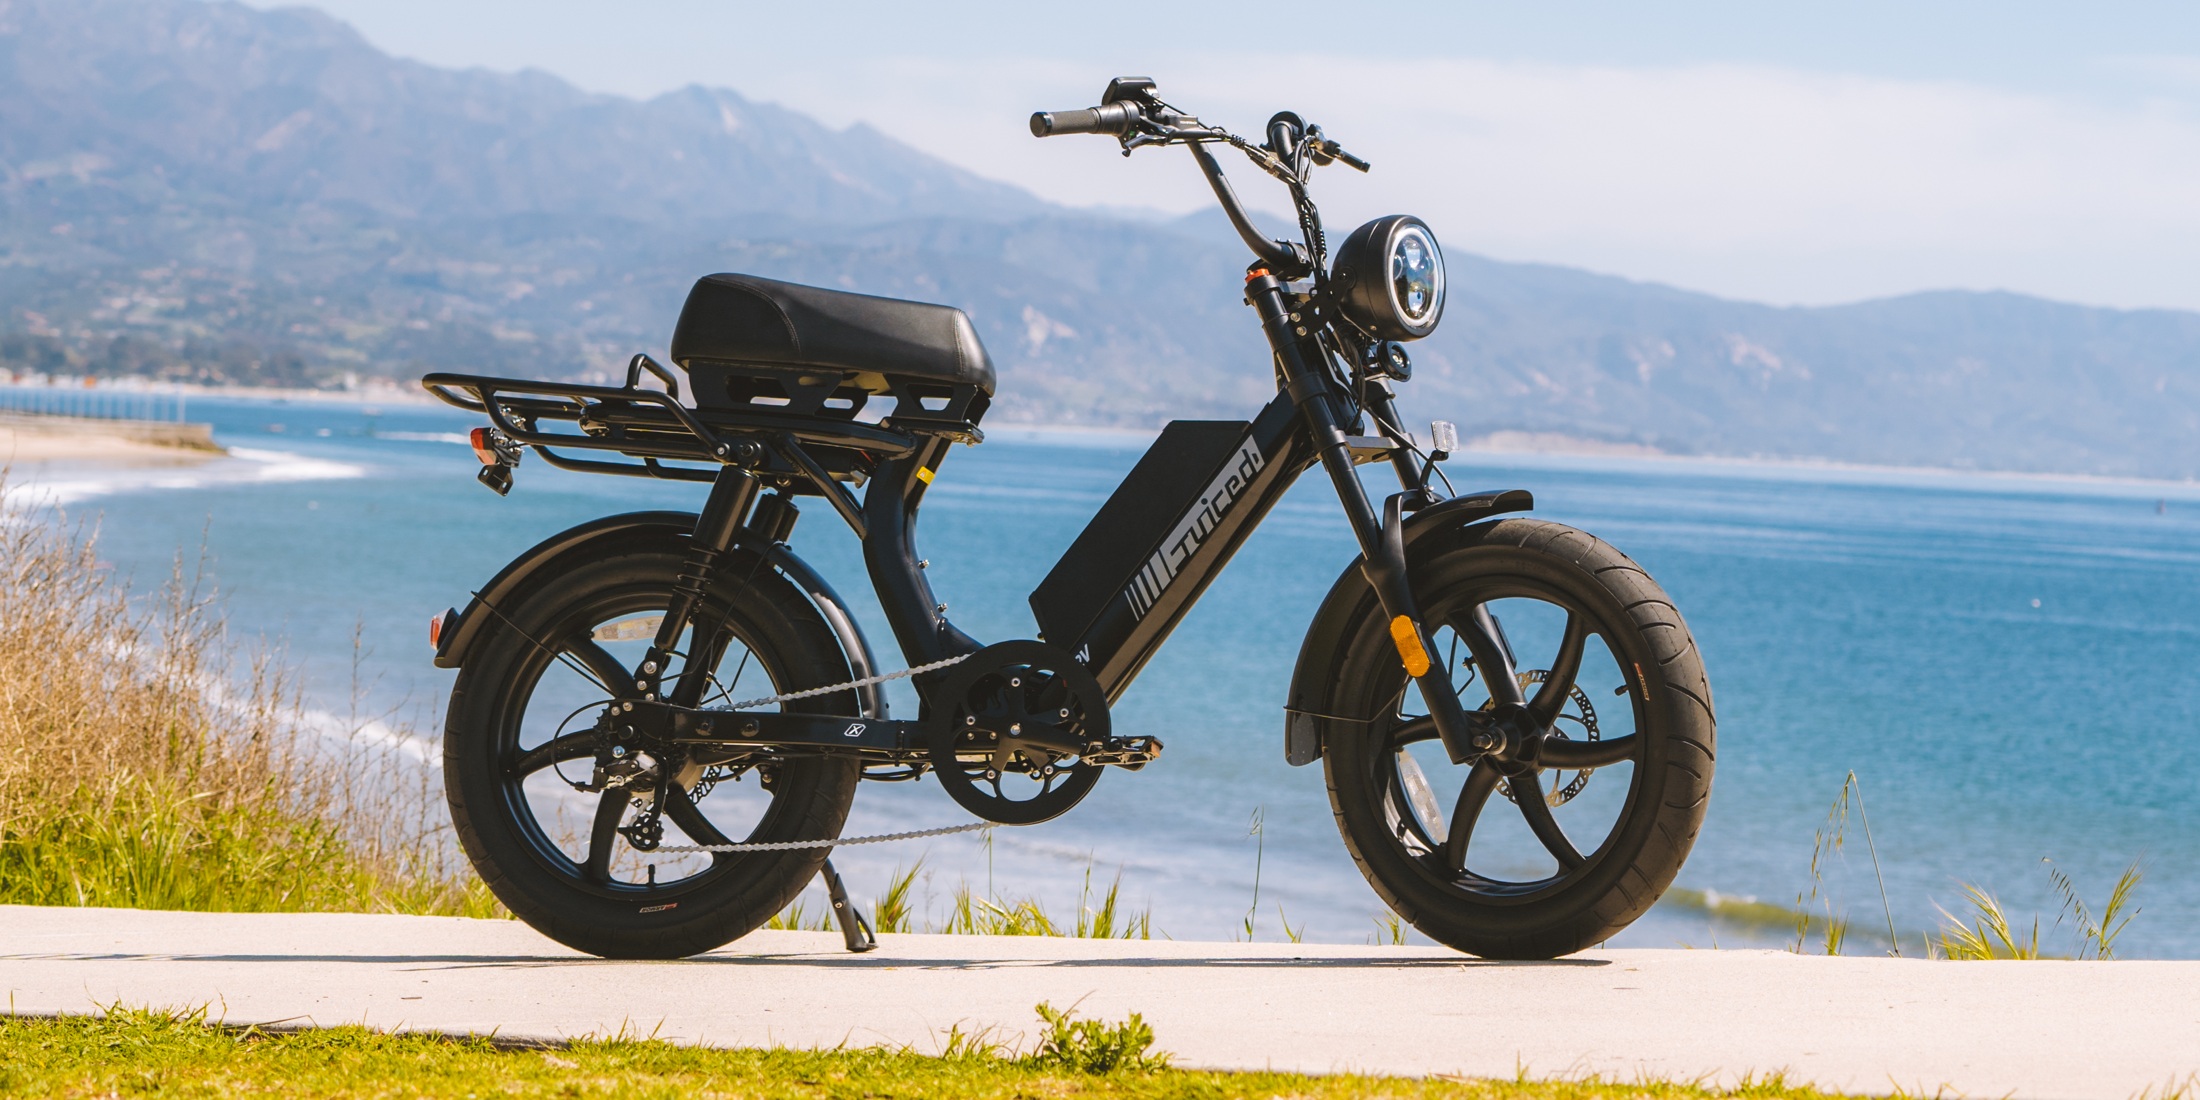 Juiced Scorpion X moped-style electric bike launched at discounted